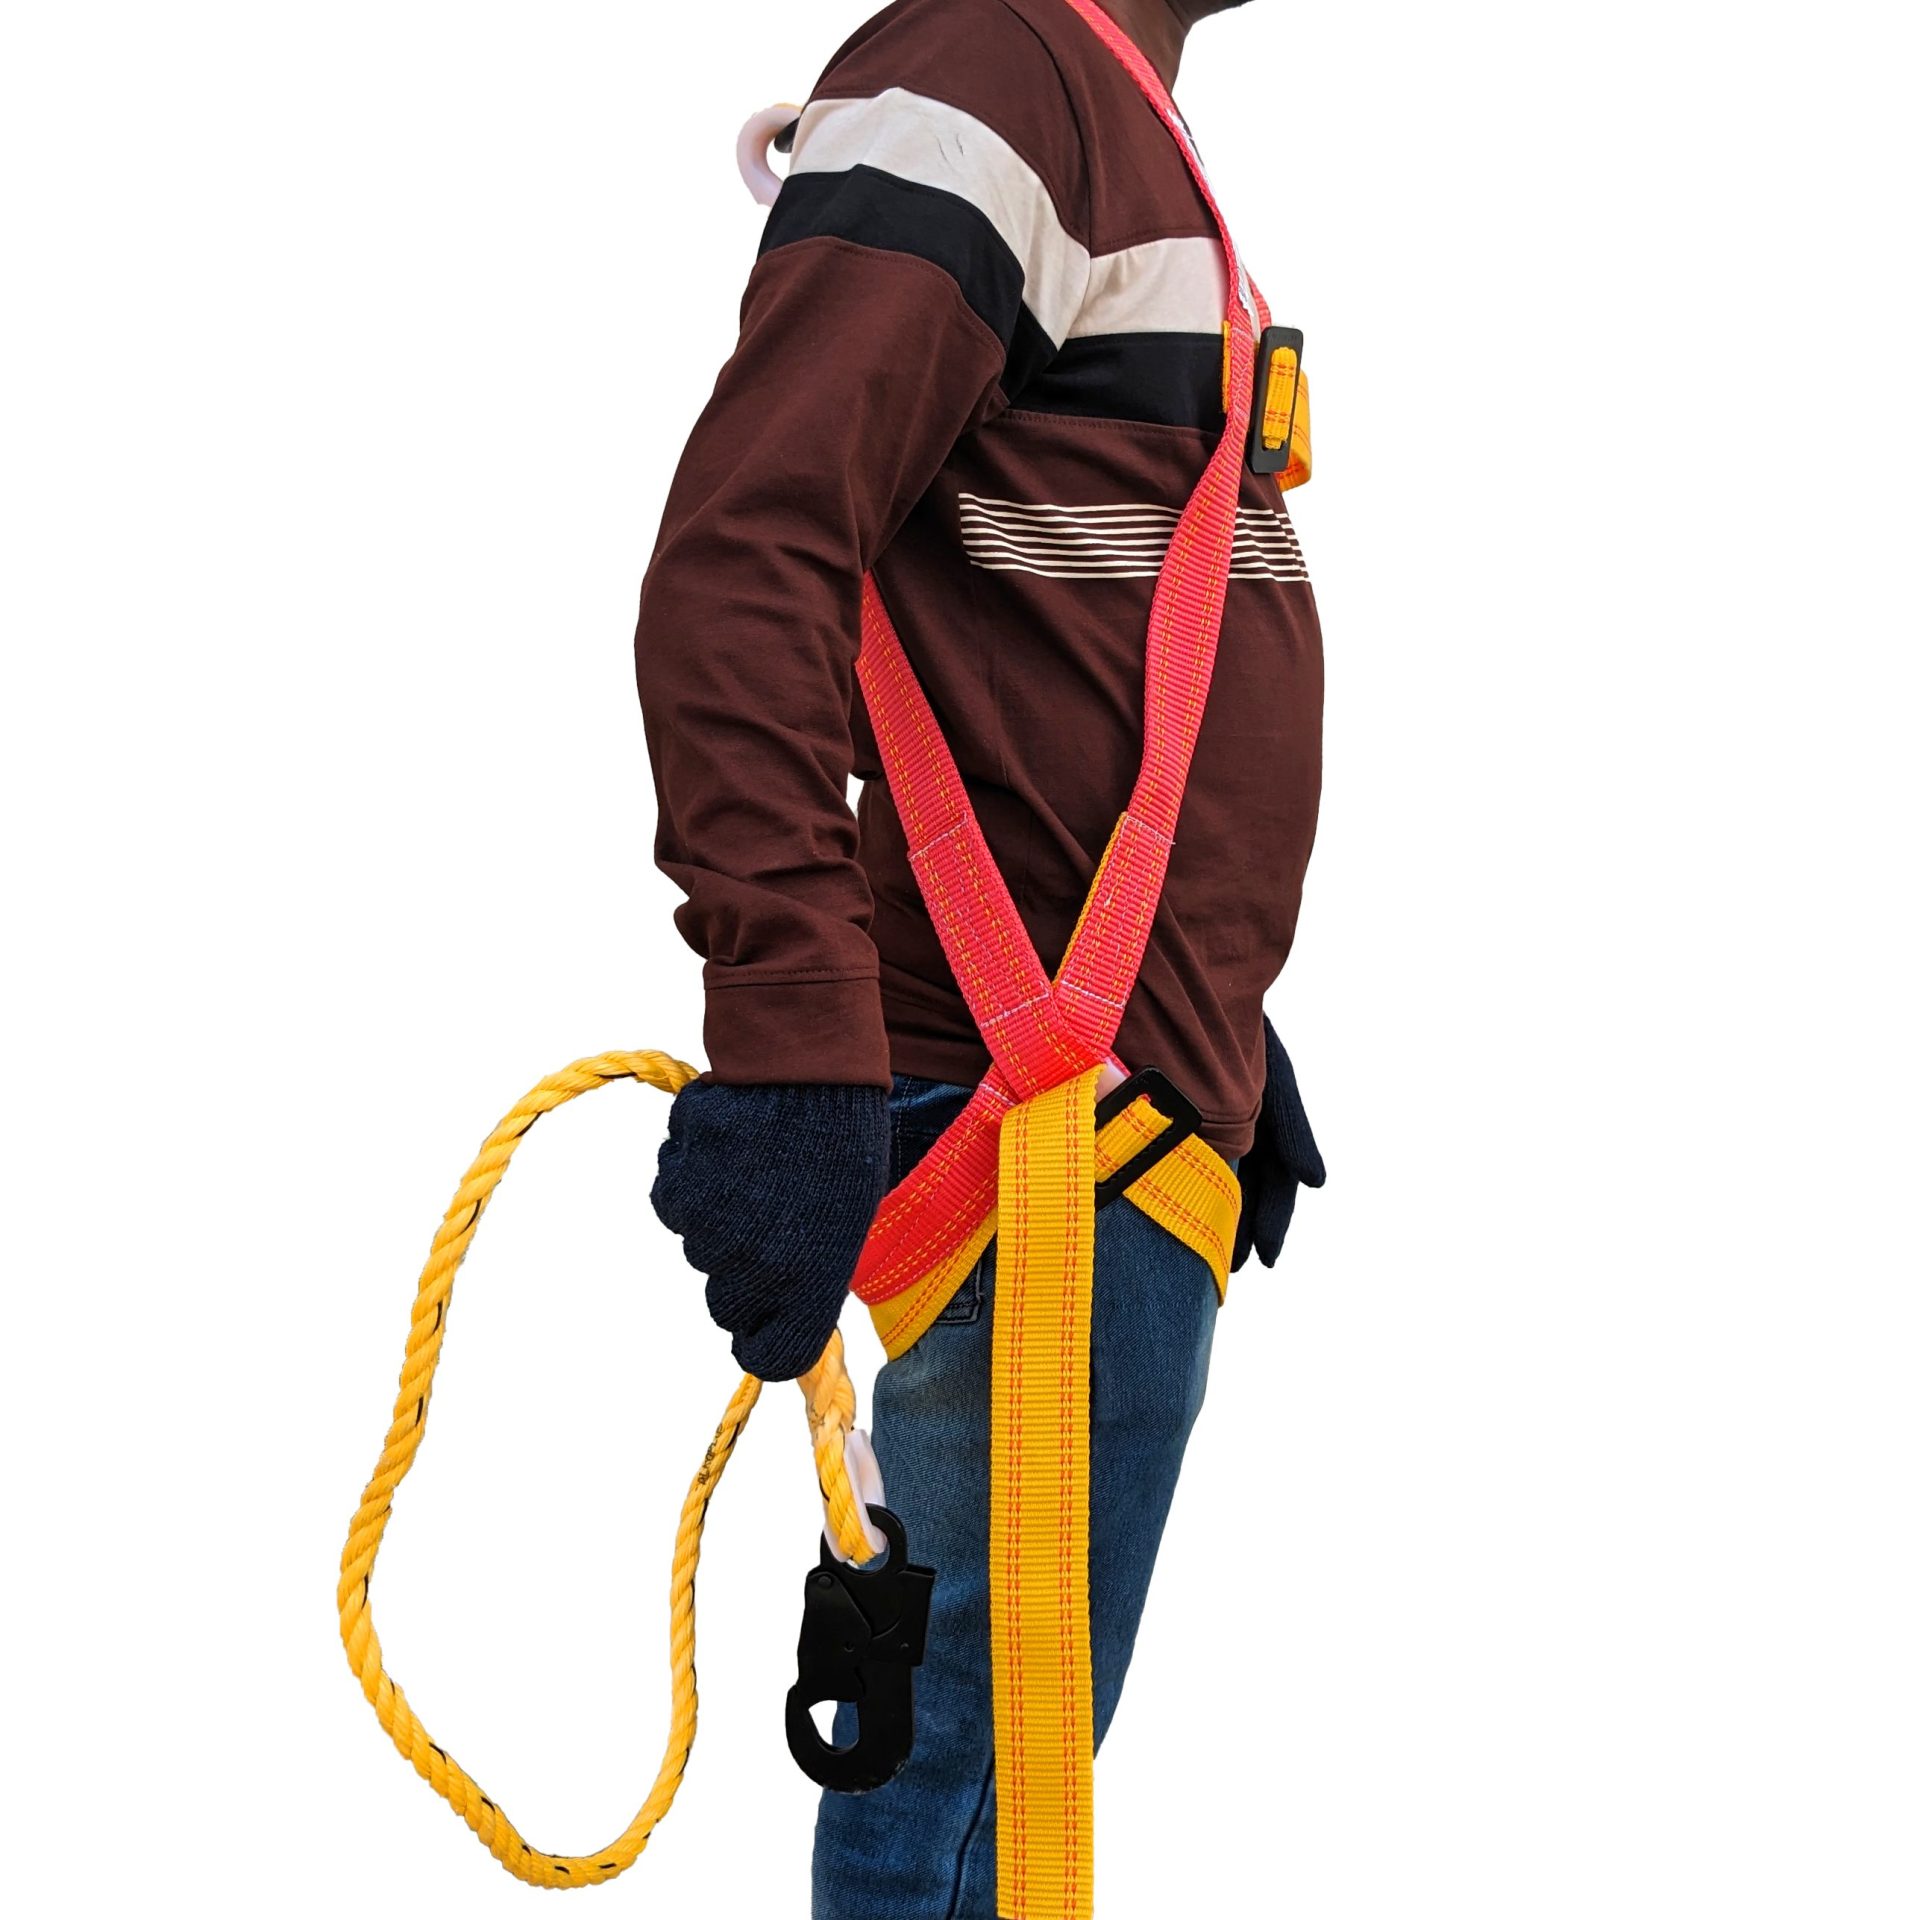 Ladwa - Safety Belt Harness Full Body Fall Protection with